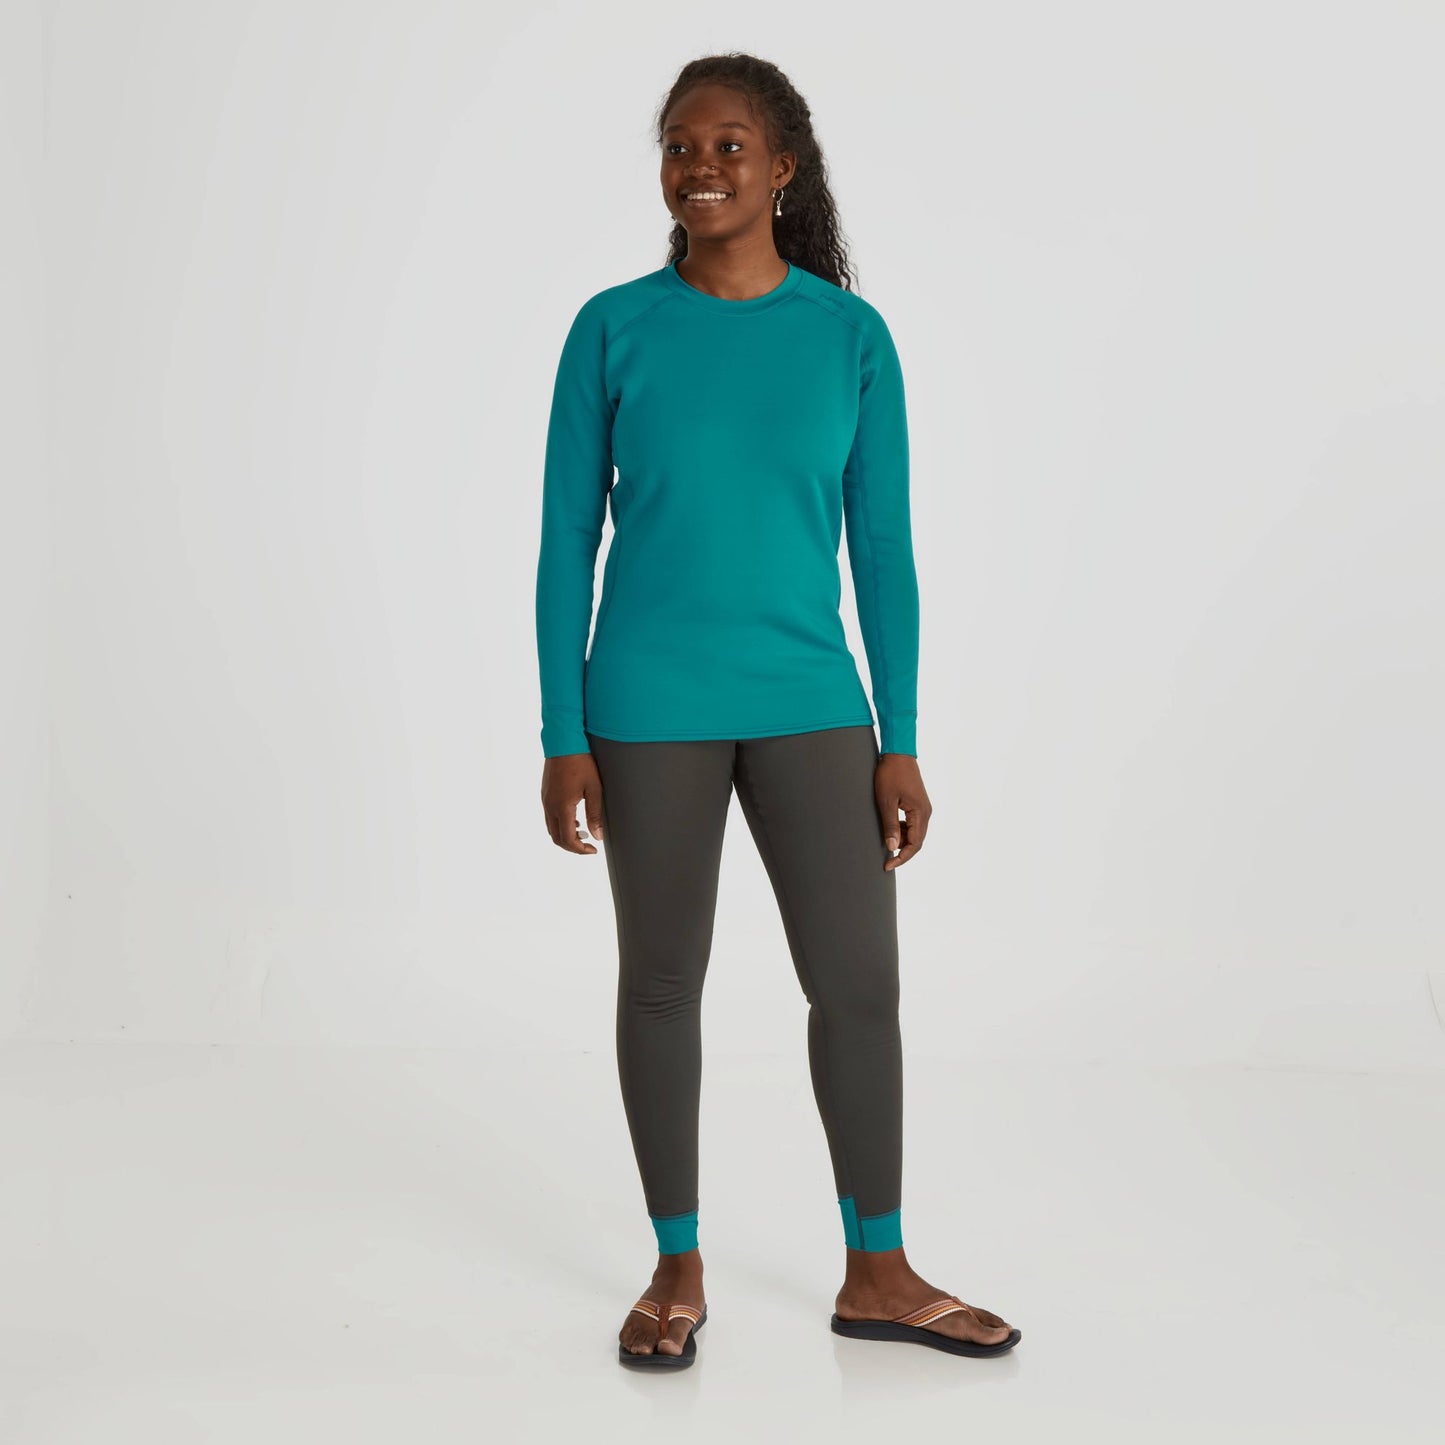 A woman in a teal long-sleeved shirt and grey NRS Expedition Weight Pants - Women's that are versatile and breathable.